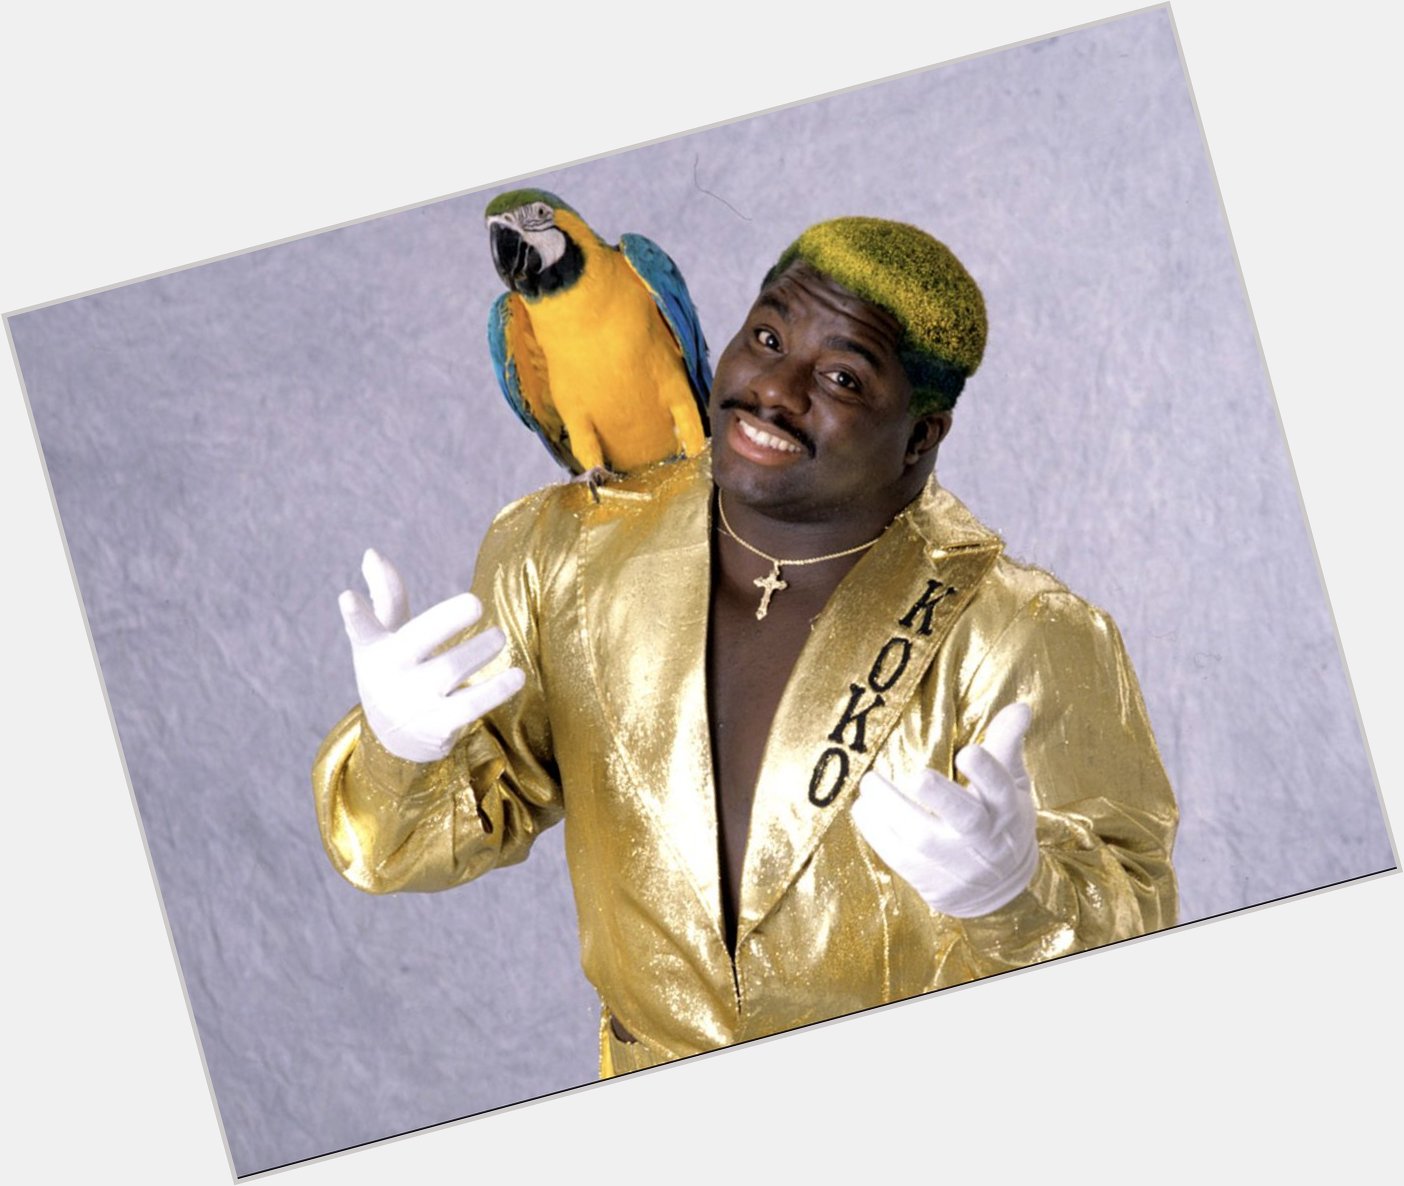 The Beermat wishes Koko B. Ware a Happy Birthday.

Have a good one  